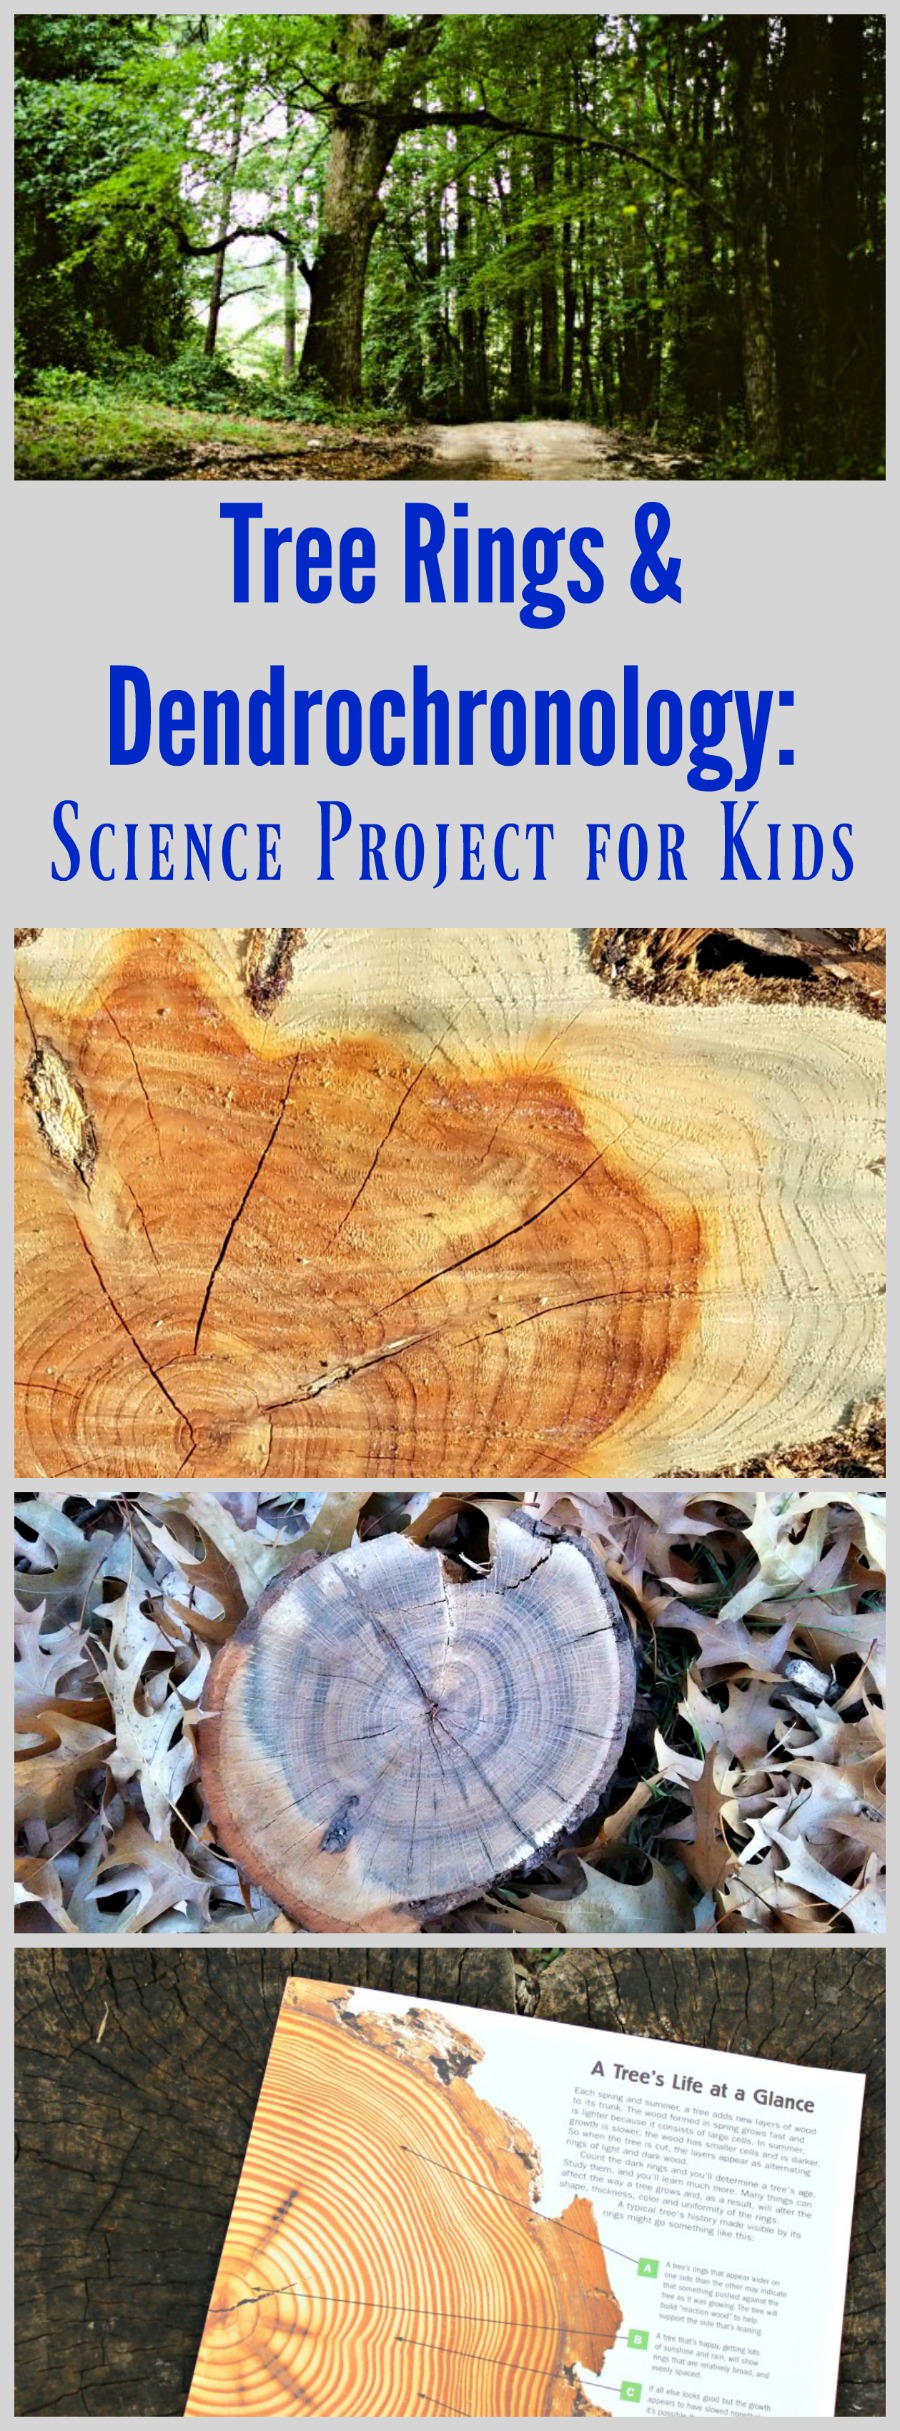 Dendrochronology: the science of tree rings for kids